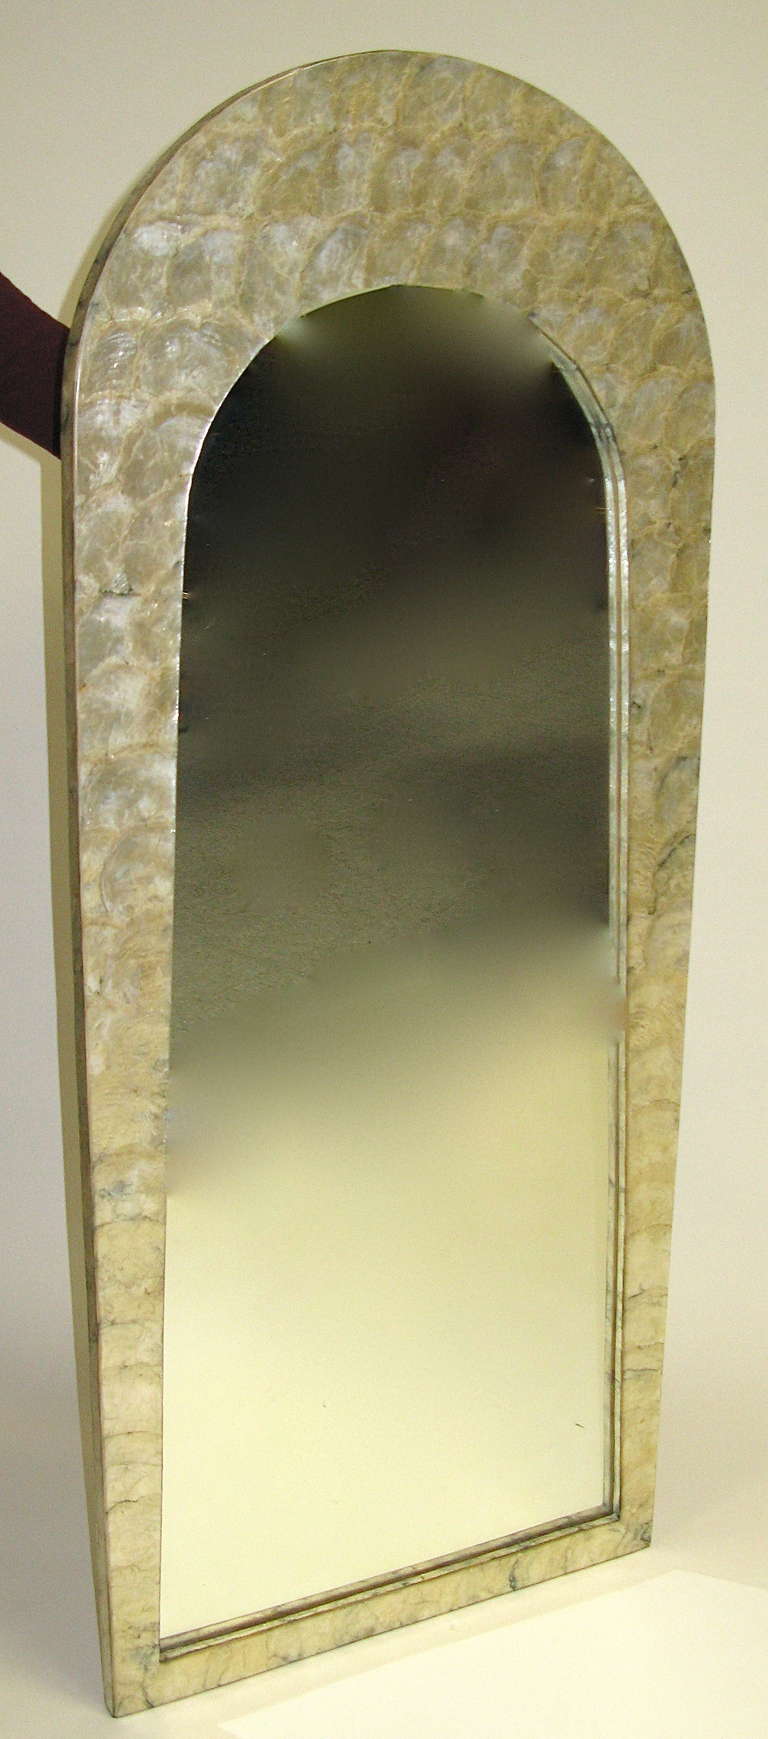 Shimmery capiz shells make up the frame of this rounded top mirror. Mirror is a bit hazy, but still clear. (Could be replaced) Shells have heavy clear coating. Frame is in very good condition.